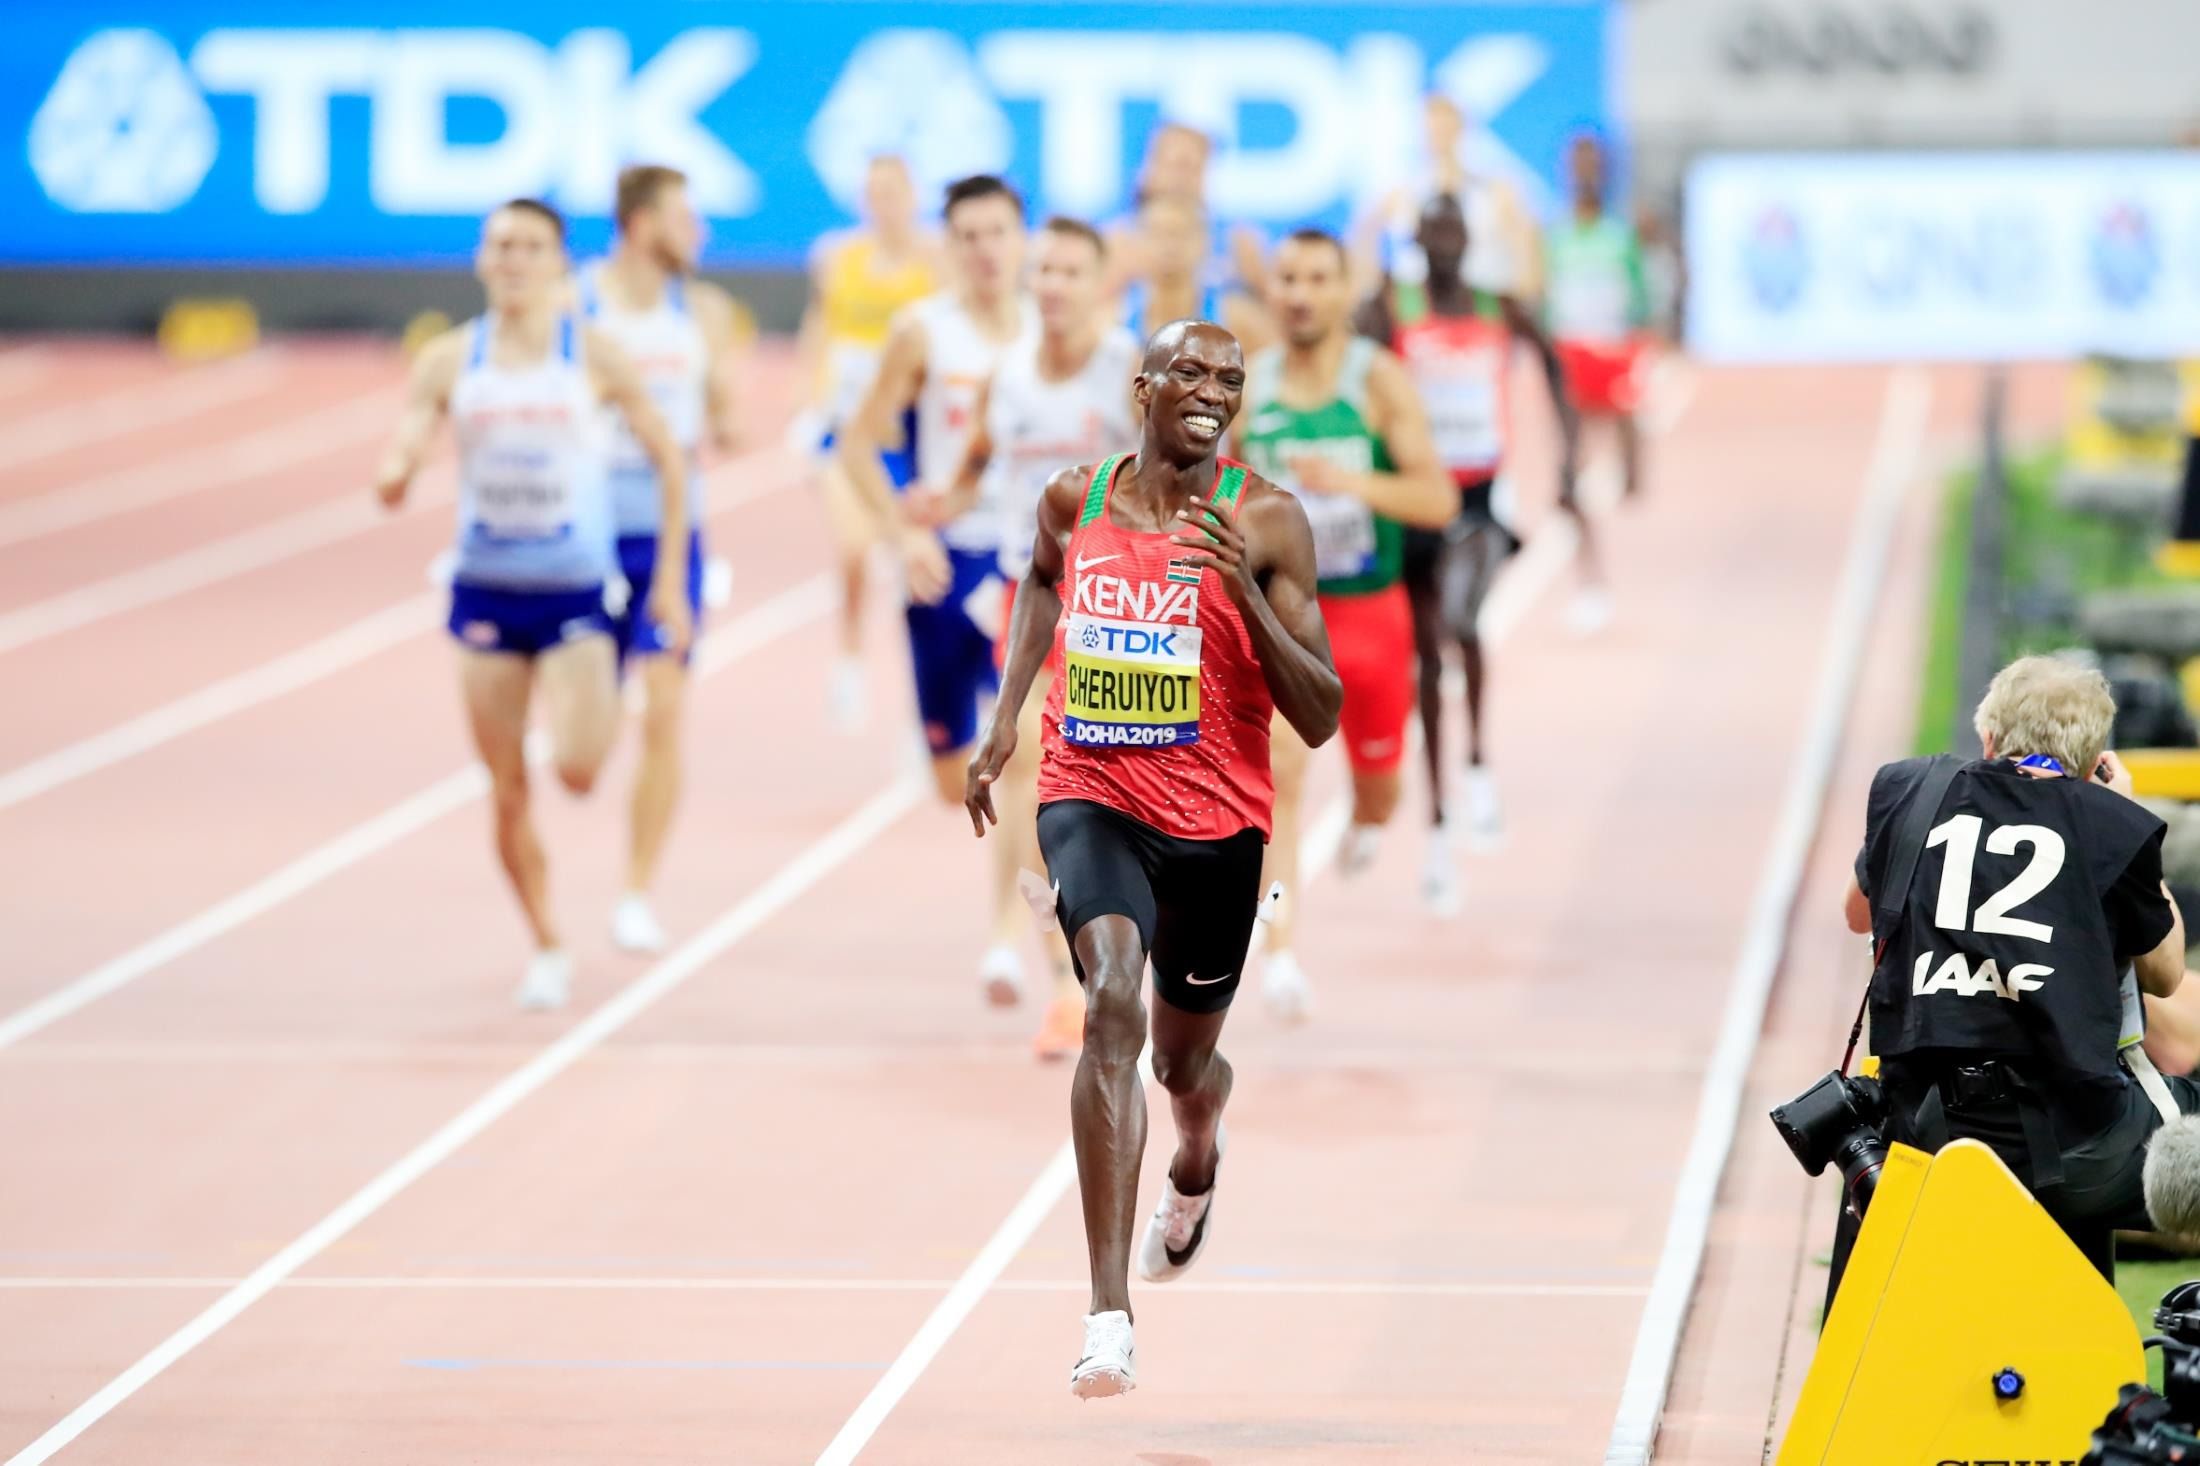 Timothy Cheruiyot storms to the 1500m title at the IAAF World Championships Doha 2019